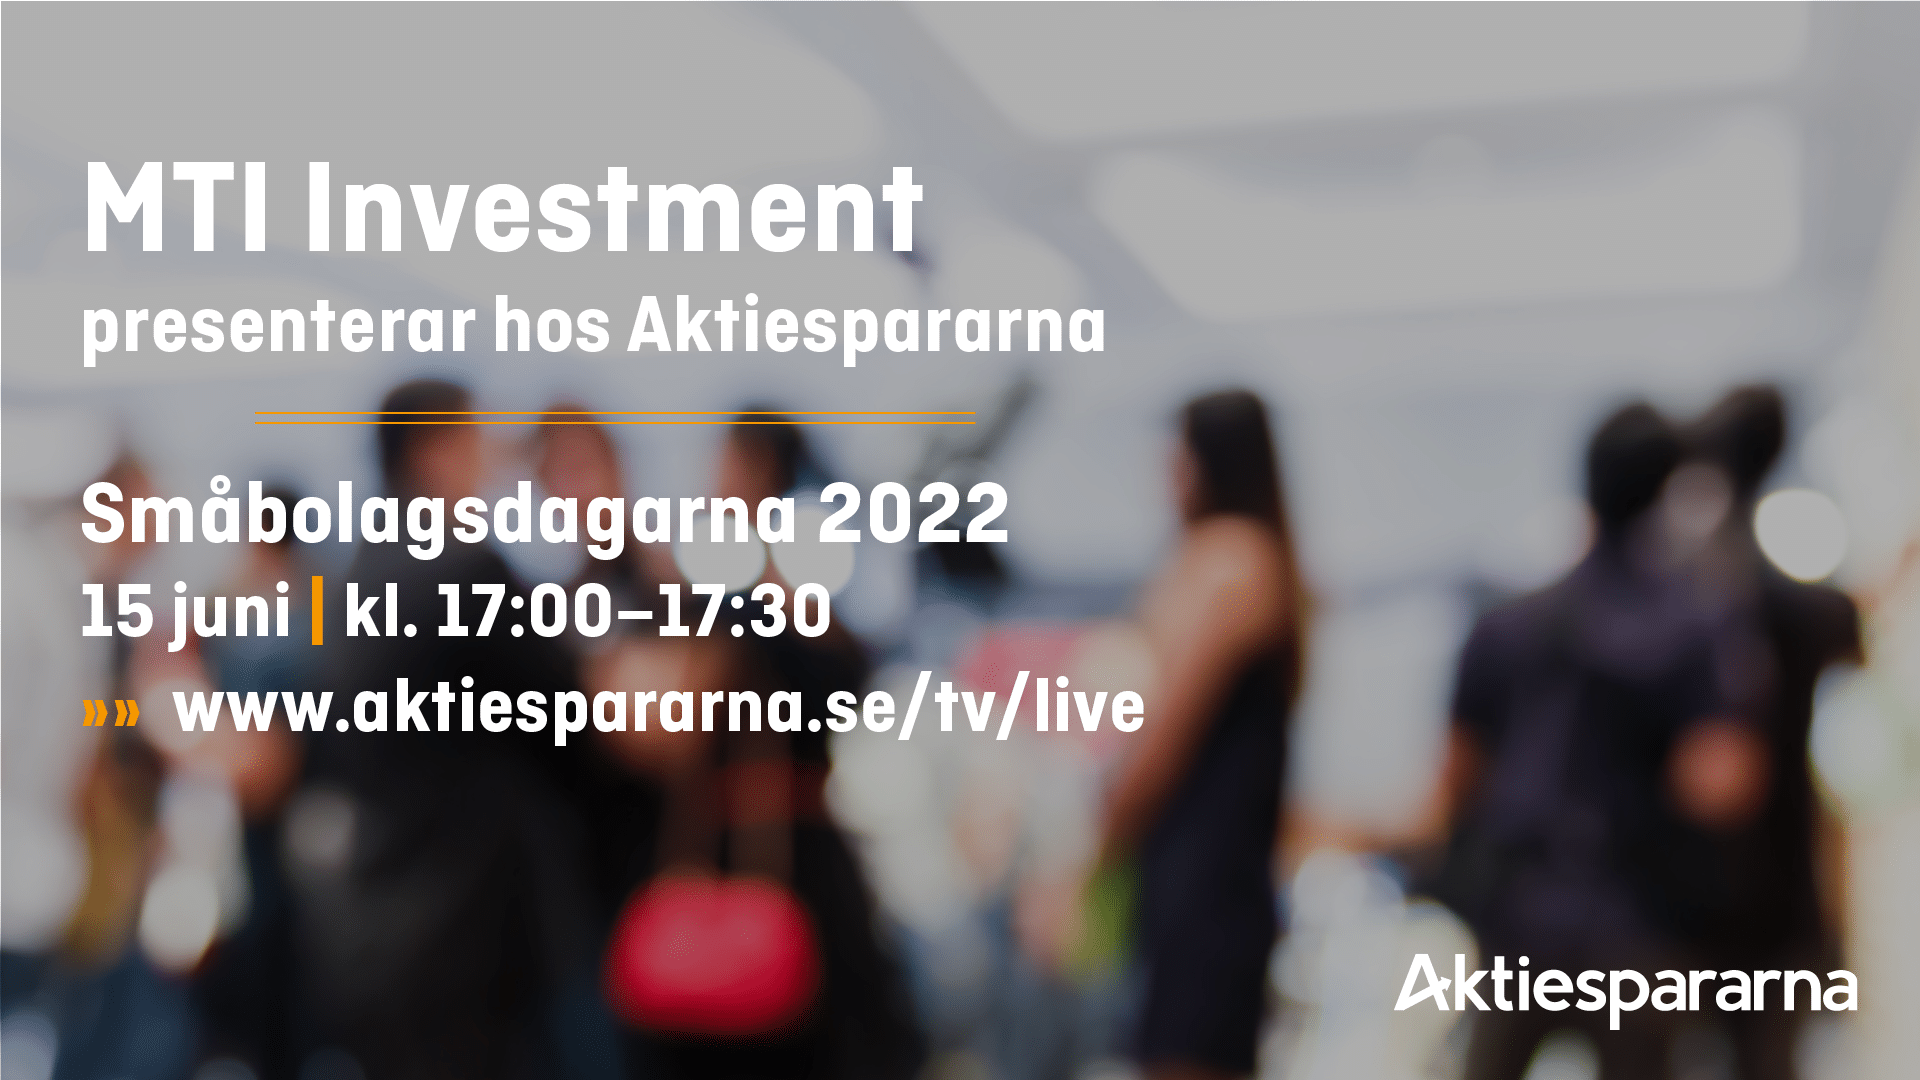 Promo poster of the participation of MTI investment co founder at Aktiesparana